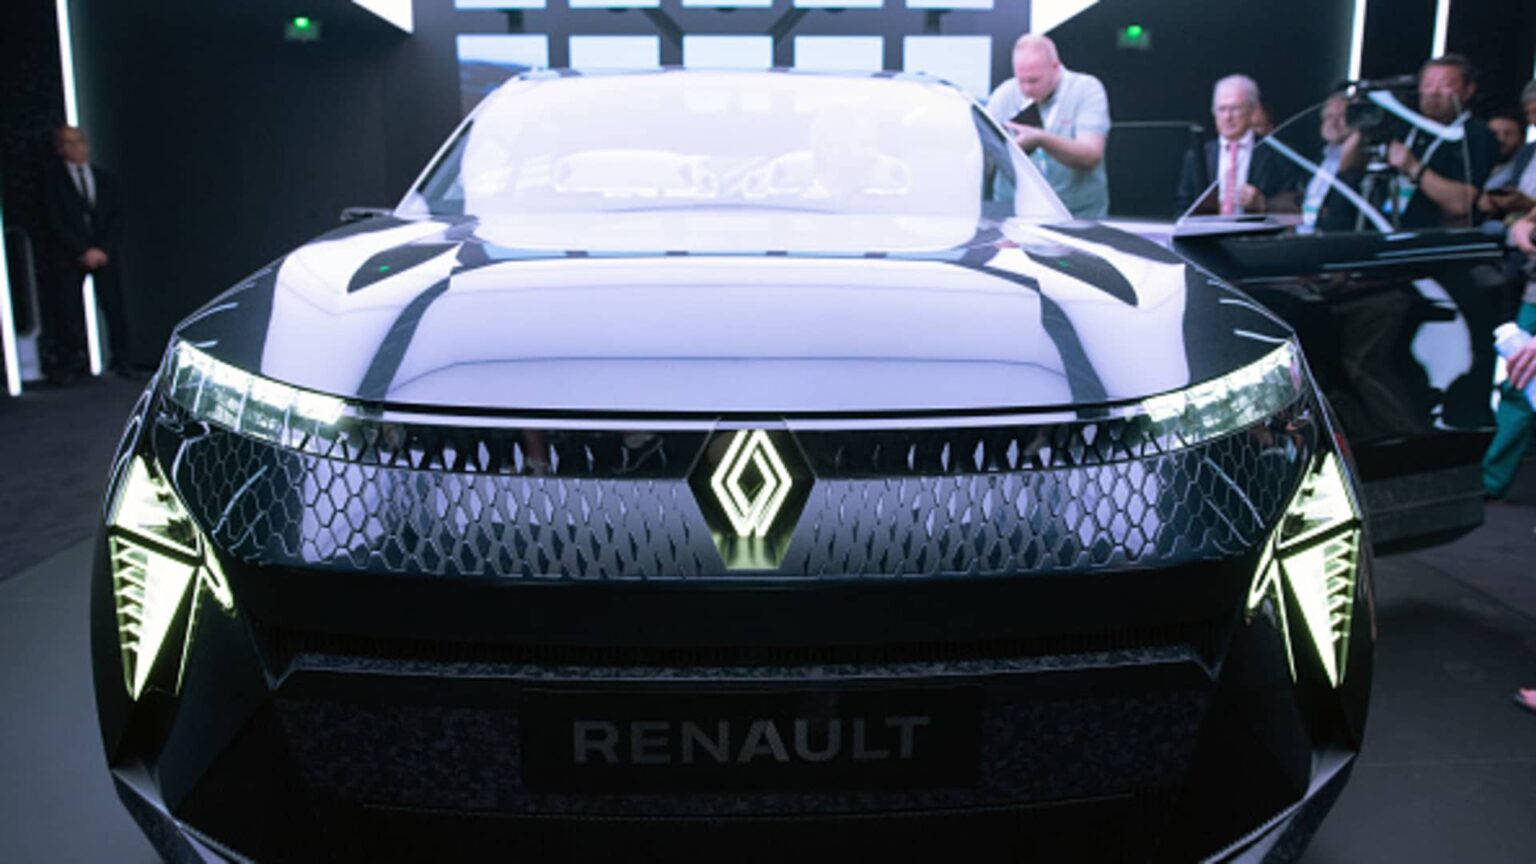 Renault’s turnover increases by 30% in the first quarter